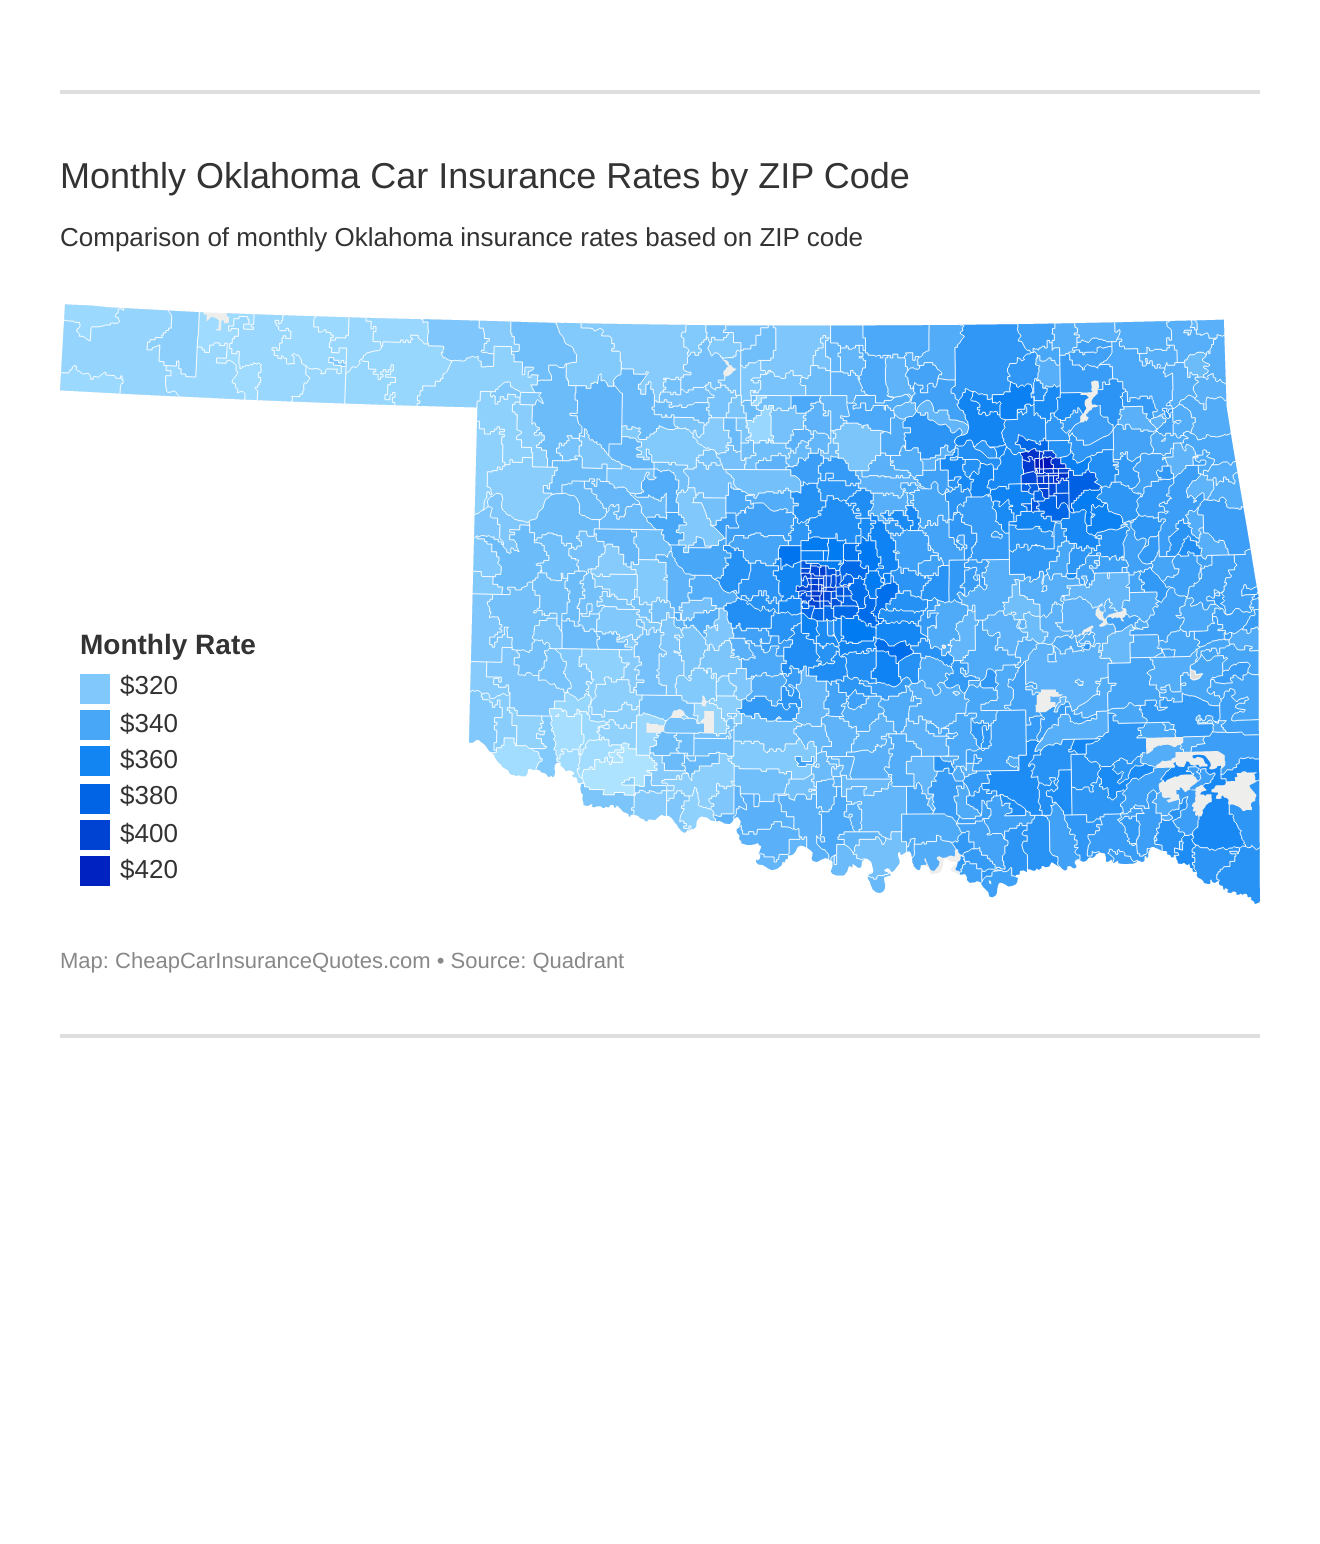 Monthly Oklahoma Car Insurance Rates by ZIP Code